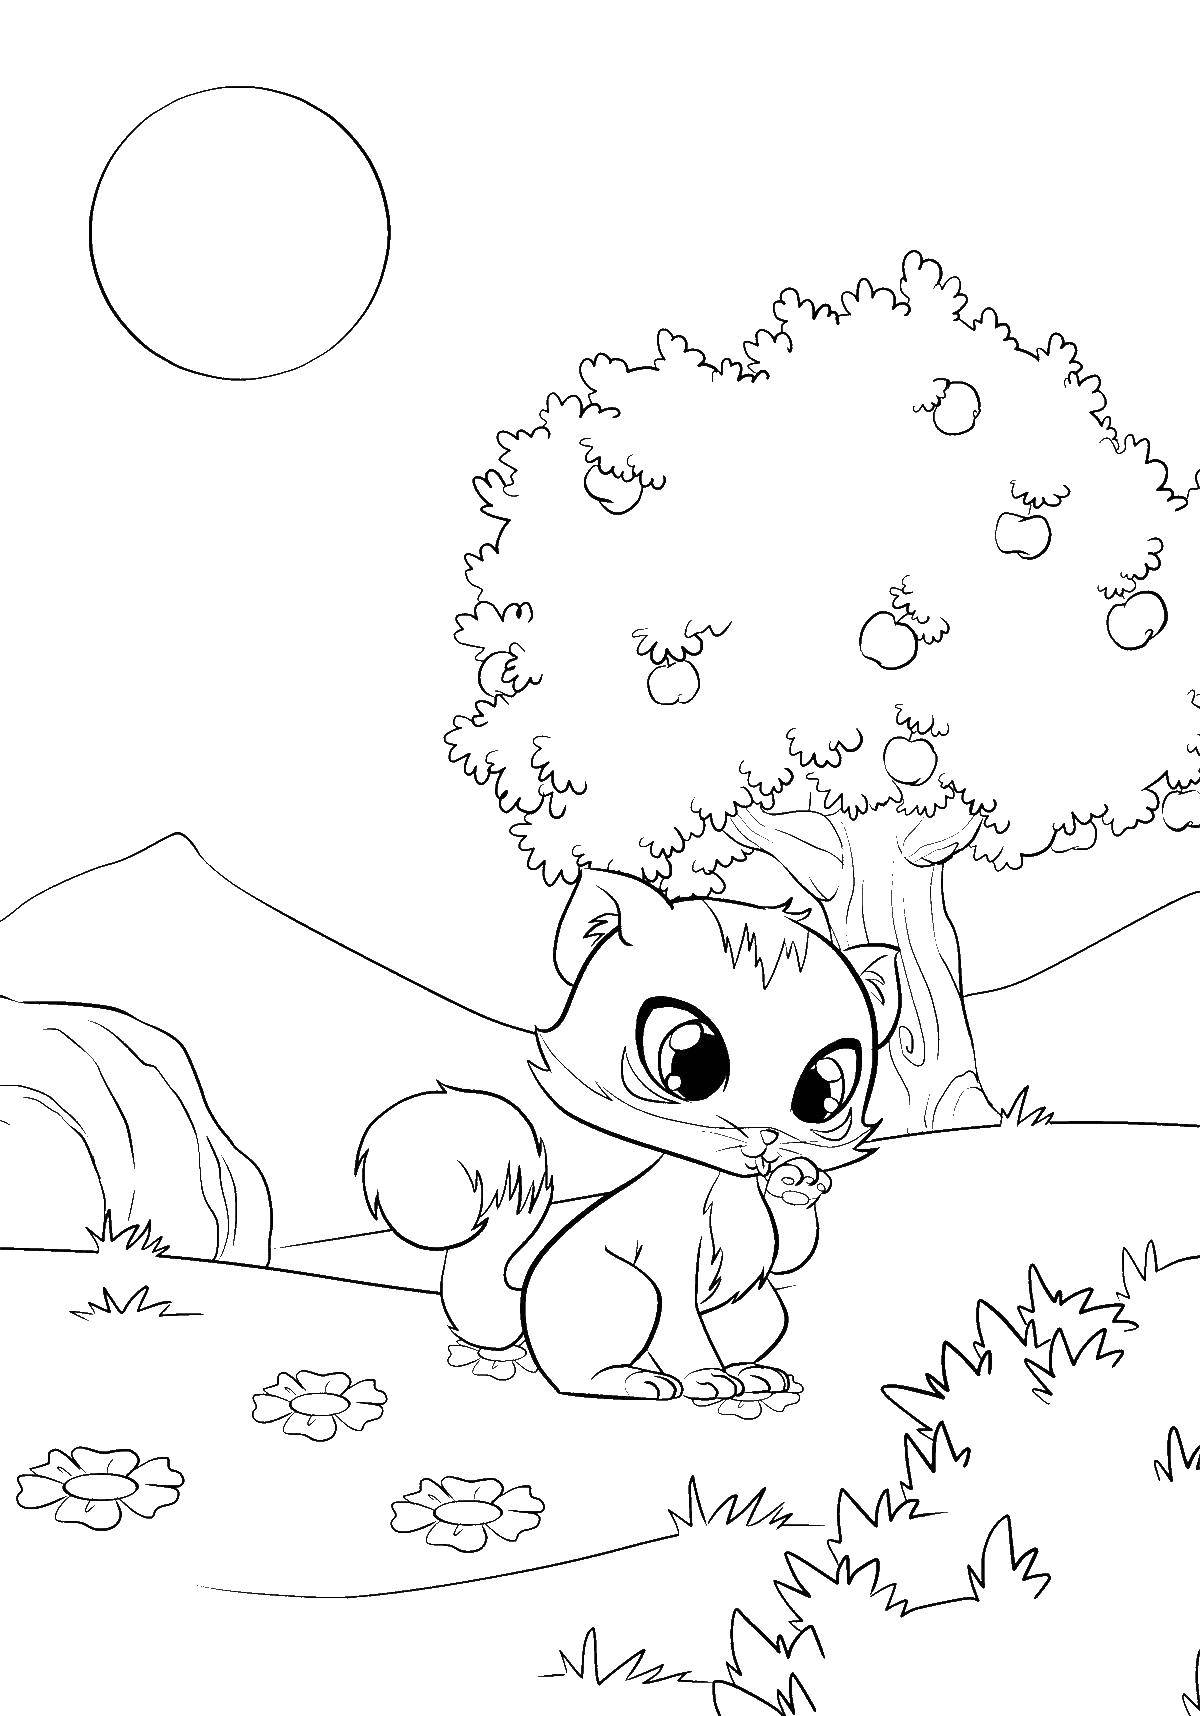 Coloring Kitten and the Apple tree. Category kittens. Tags:  kitten, flowers, Apple.